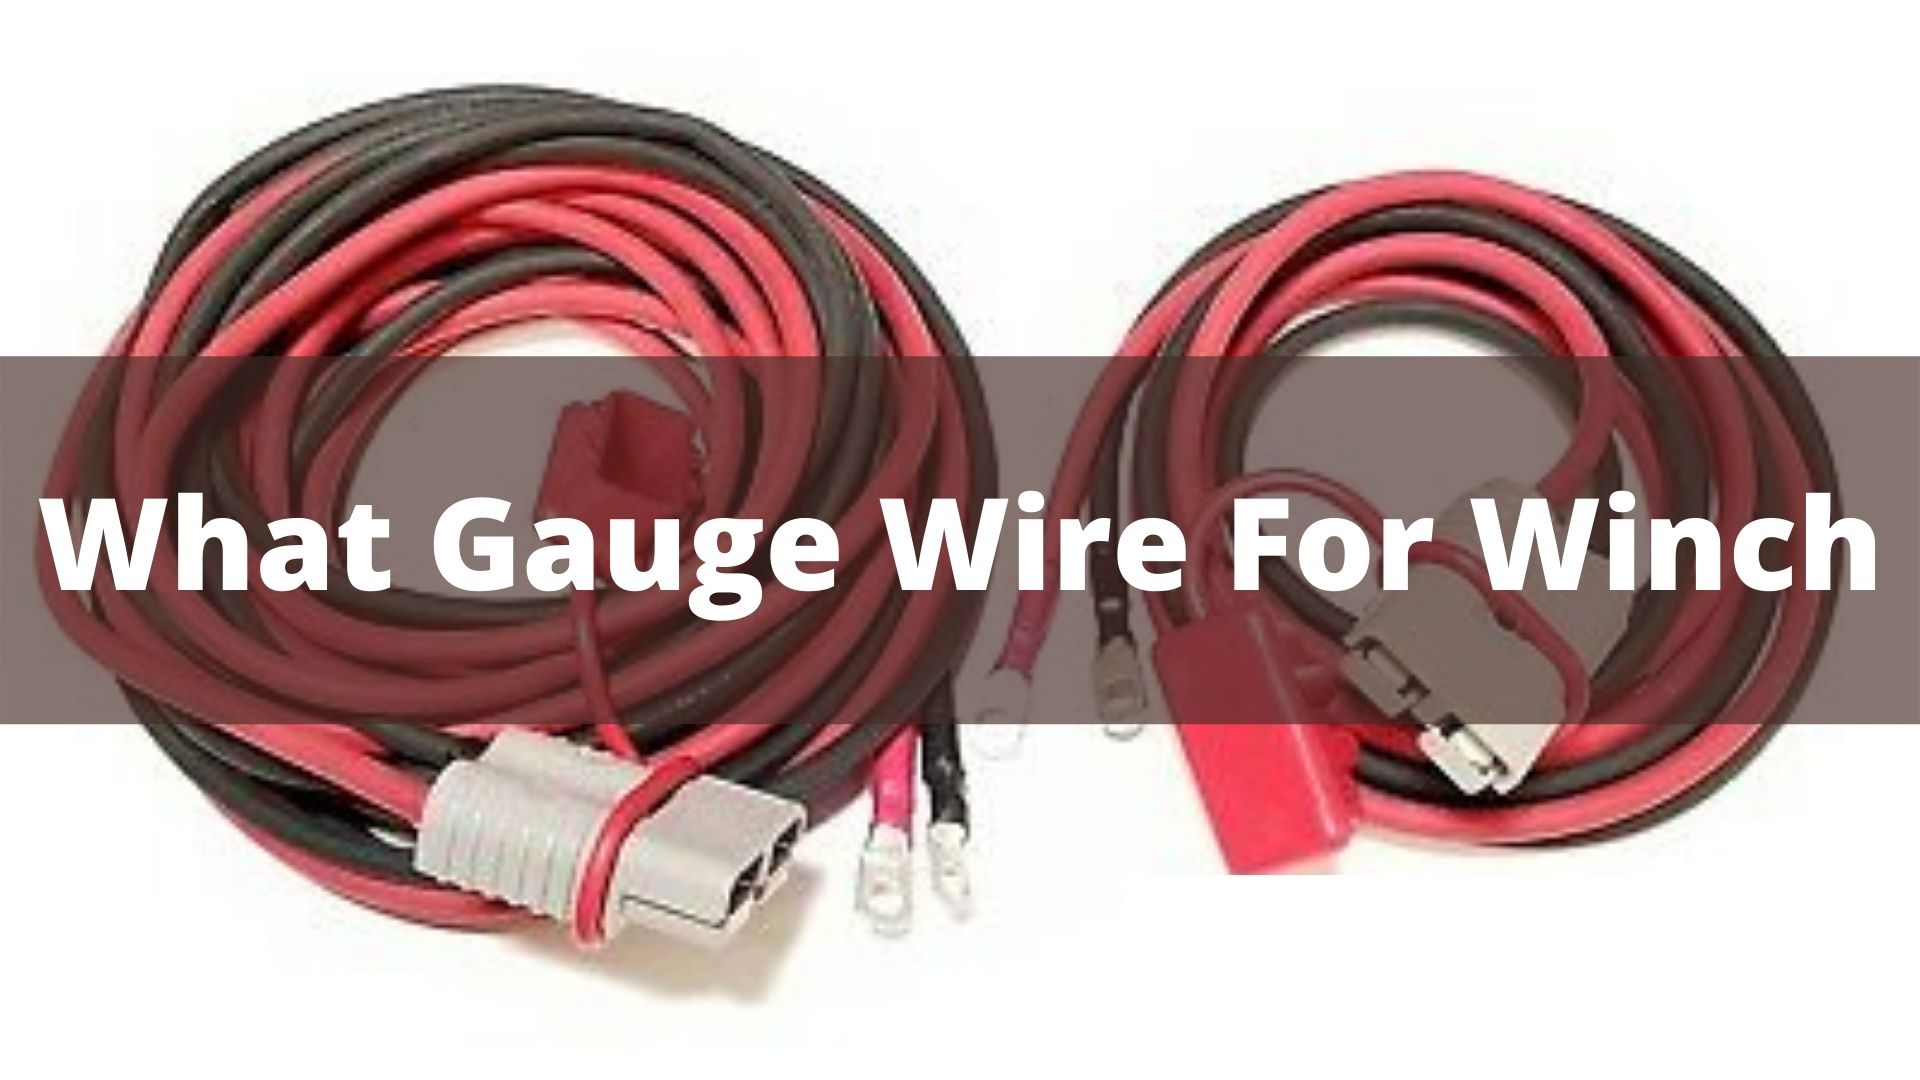 What Gauge Wire For Winch